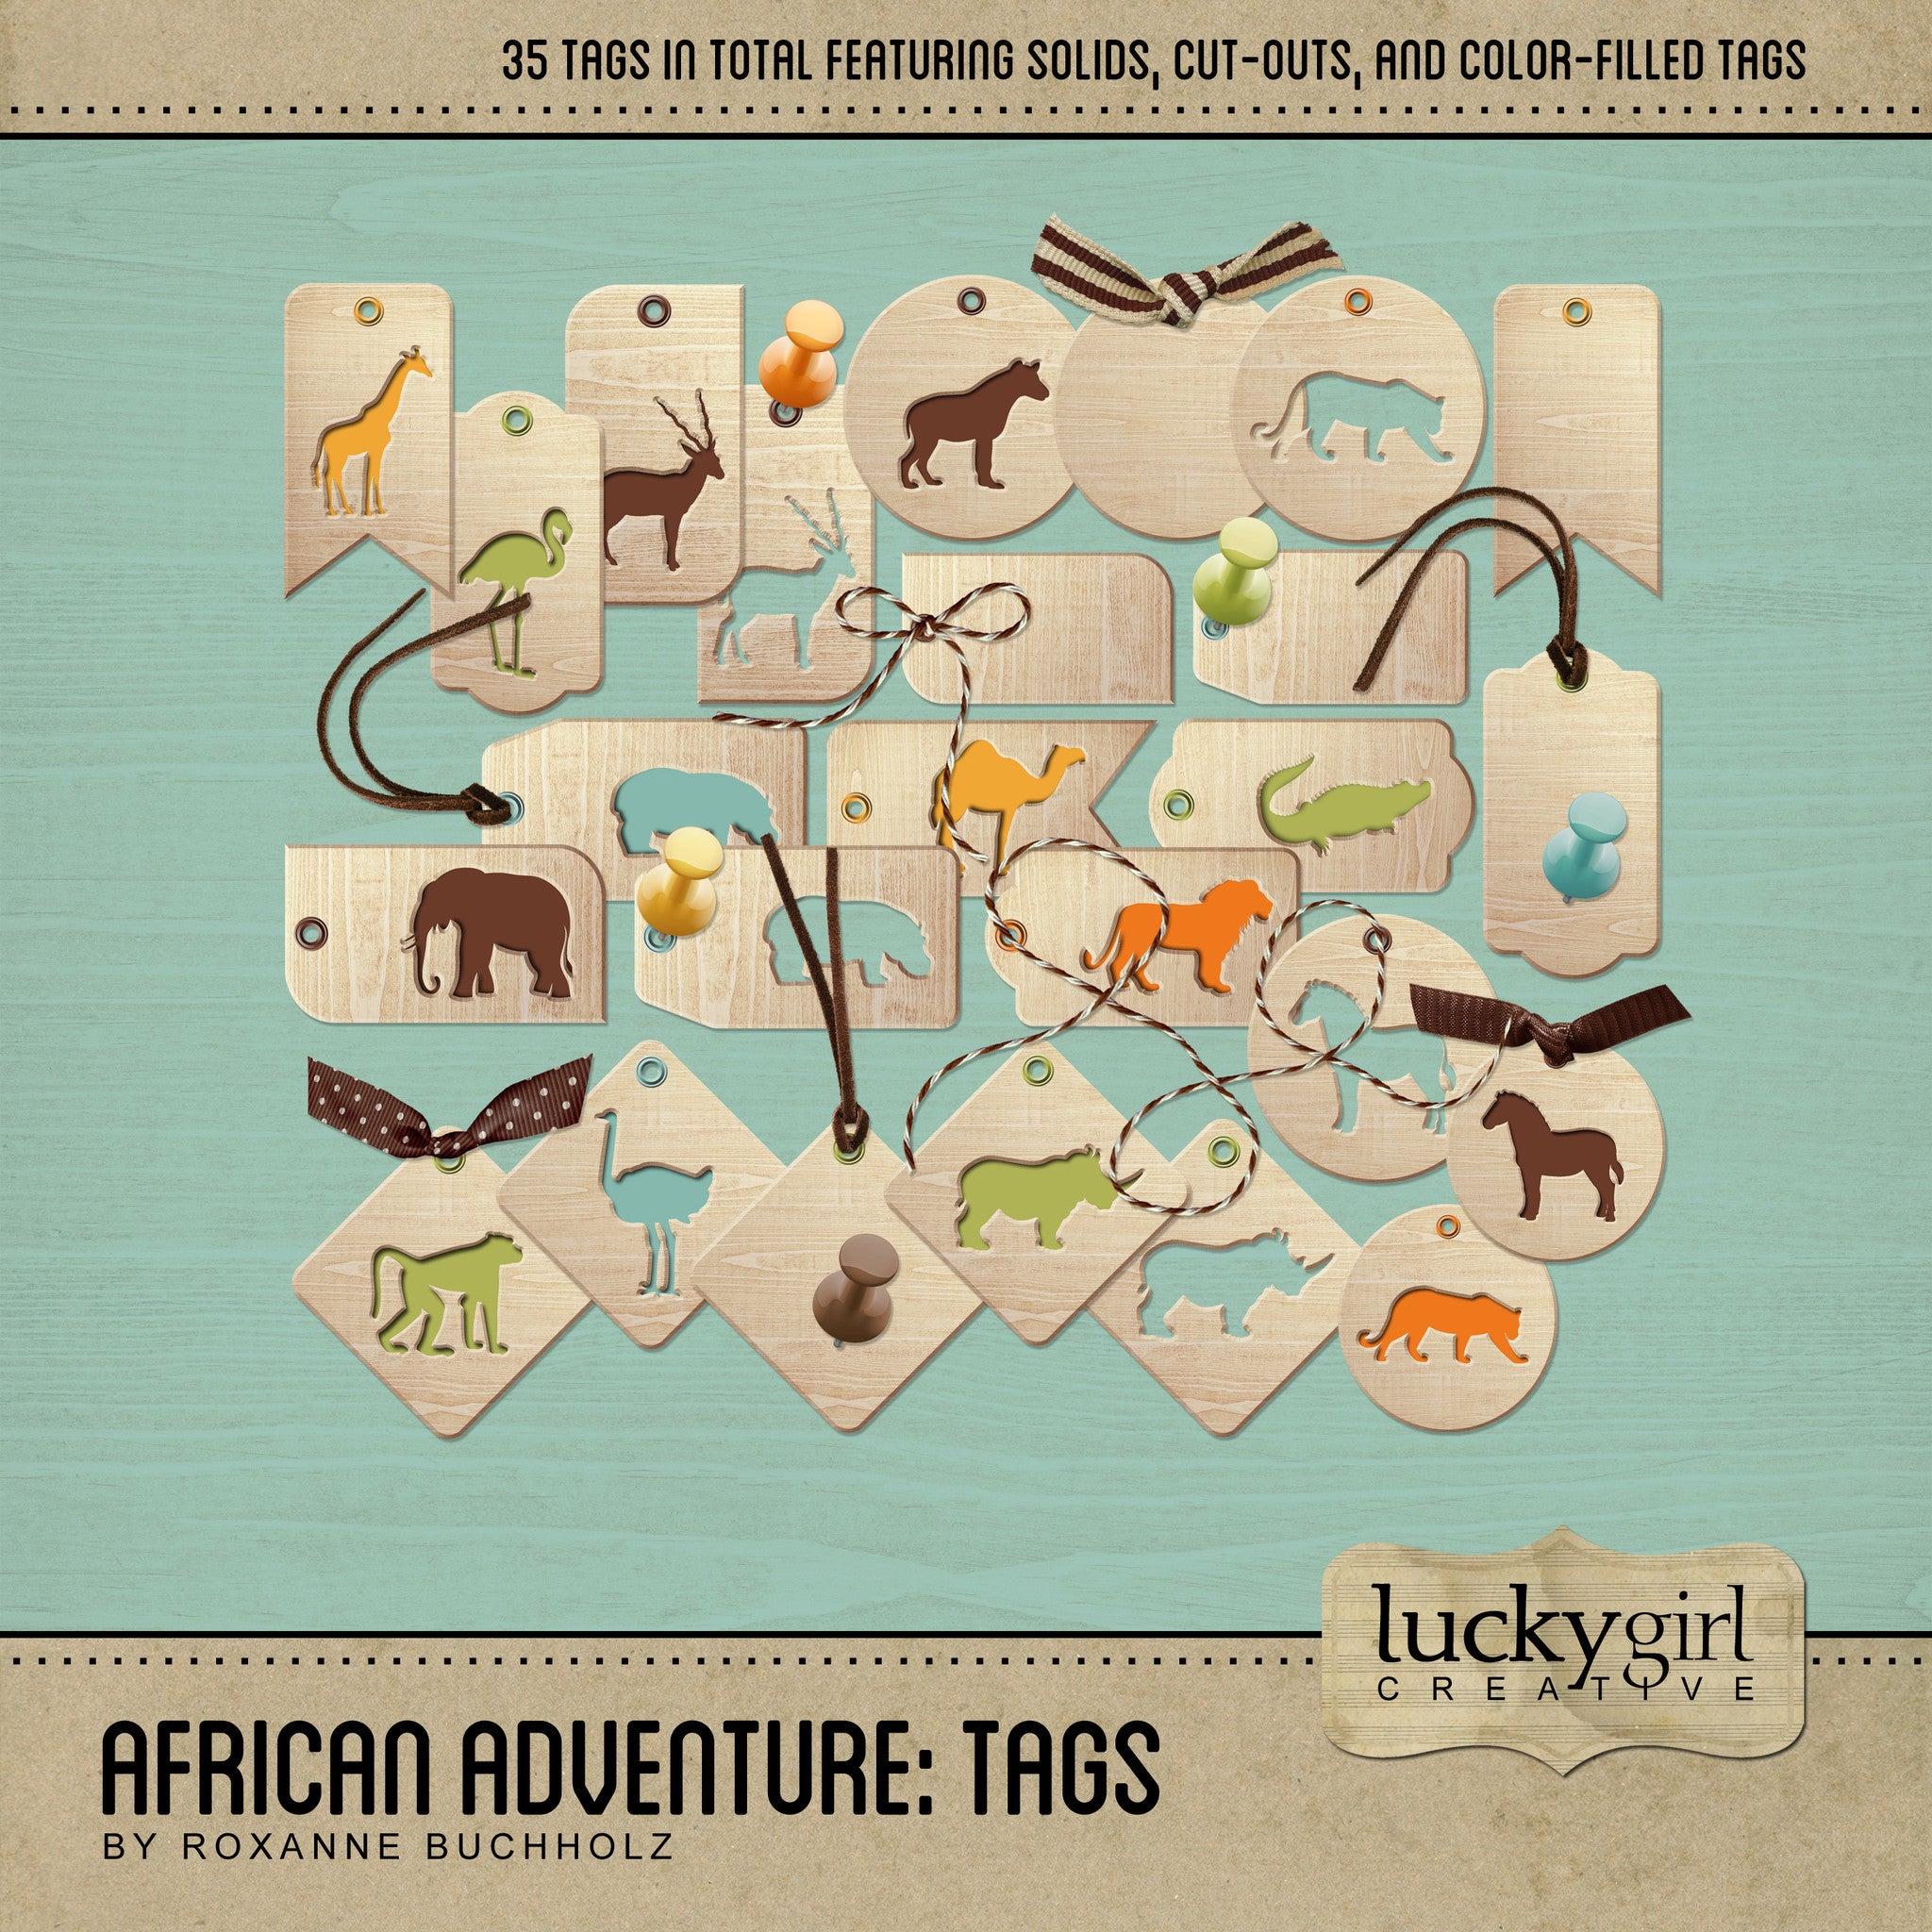 African Adventure Tags Digital Scrapbook Kit features 35 fun African animal inspired digital art tag embellishments plus 15 pieces of adorable ribbon, string, bows, and push pins. This collection has a natural color palette with modern pops of greens, blues, oranges, and yellows. Included are many African animals including giraffe, flamingo, hyena, gazelle, cheetah, lion, camel, hippo, elephant, crocodile, zebra, monkey, ostrich, and rhino. 